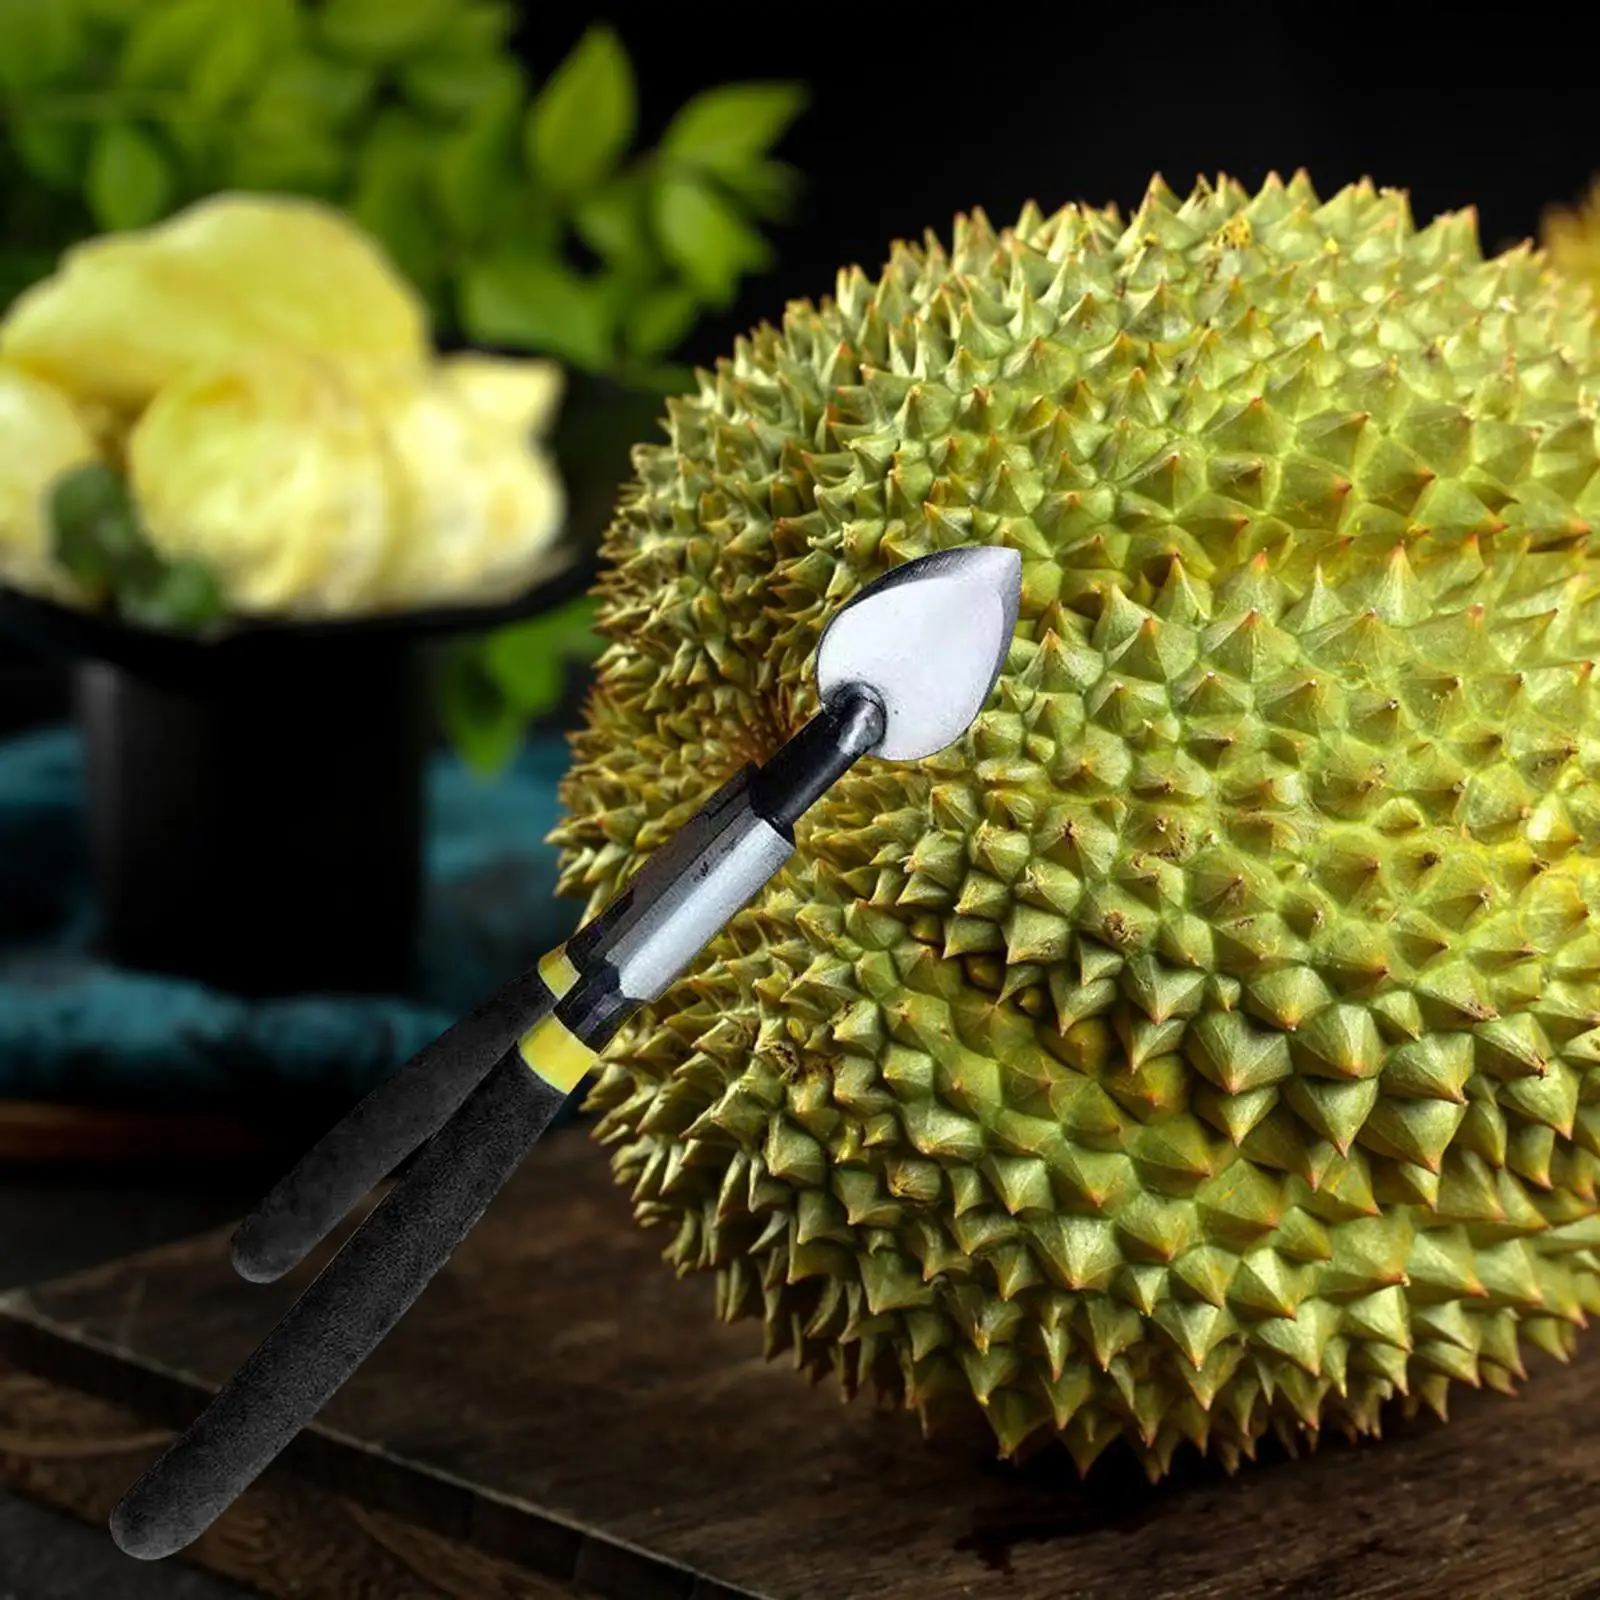 Durable Durian Opener Rustproof Peeling Smooth Manual Durian Shelling Machine for Kitchen Restaurant Cooking Household Utensils